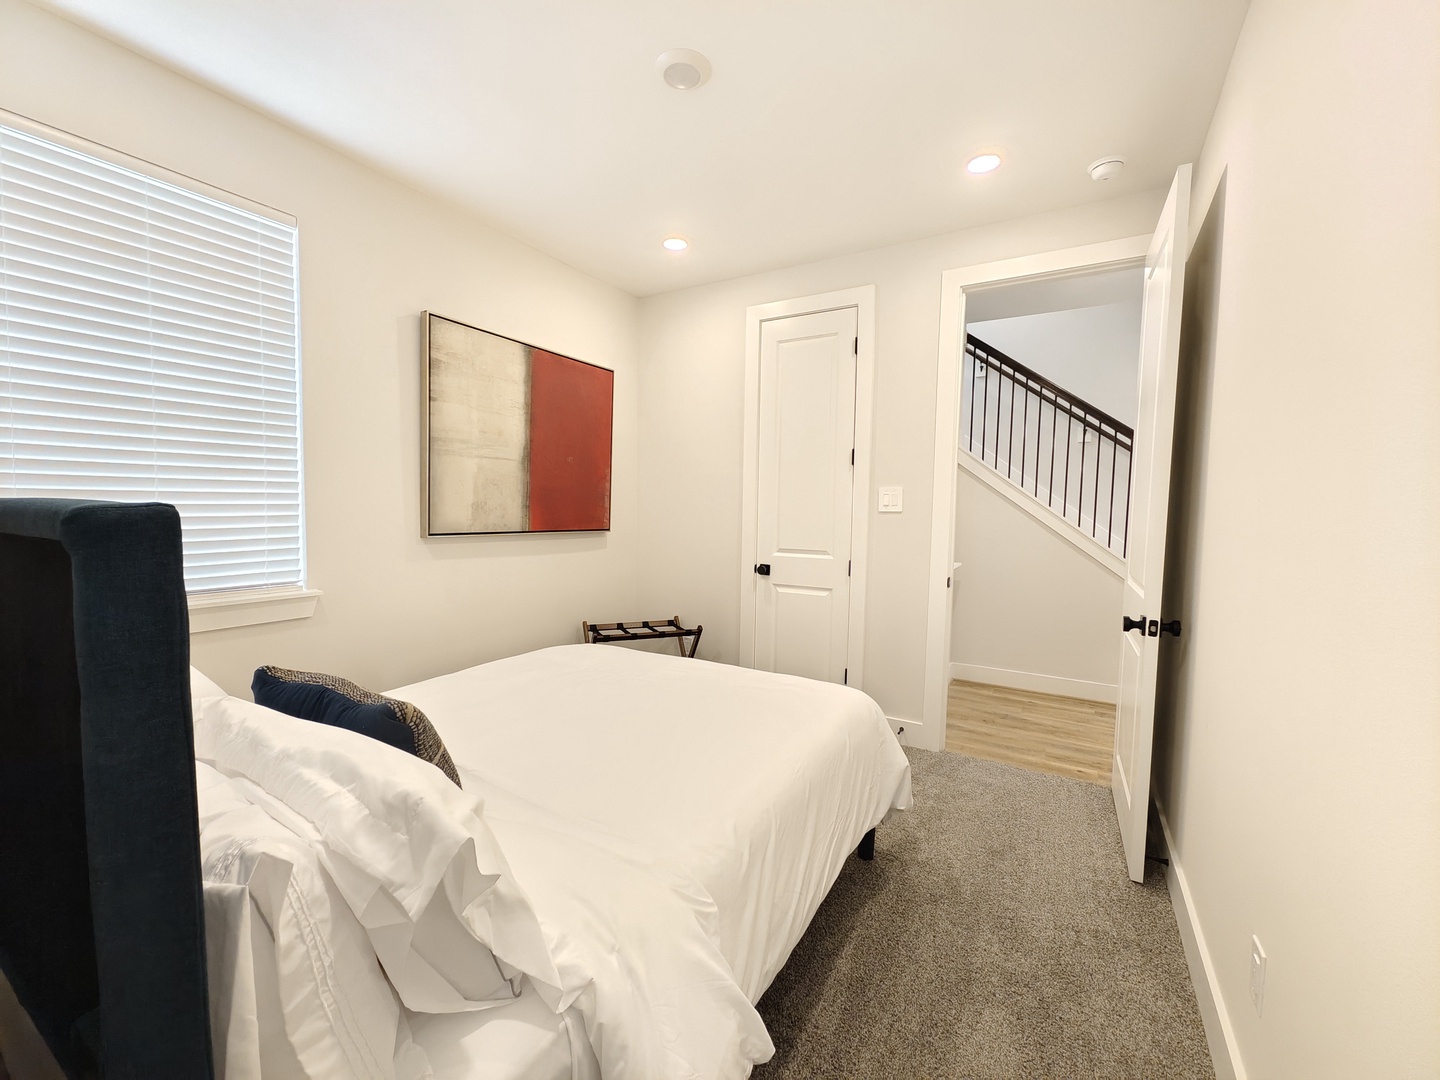 The 1st-floor suite features a plush queen bed & private ensuite